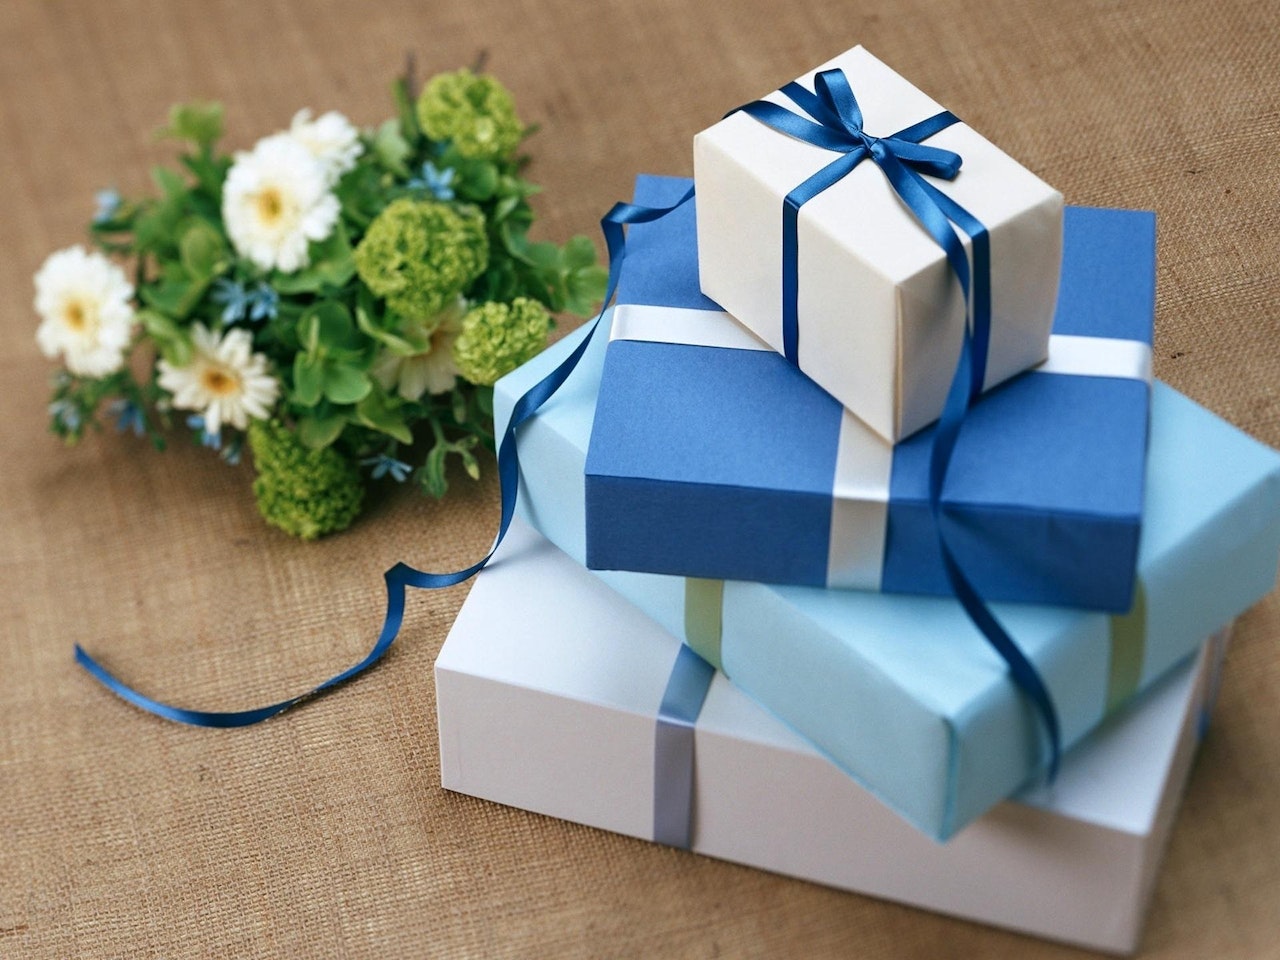 luxury birthday gifts for friends: Surprise Your Best Friend with 6 Luxury  Birthday Gifts For Friends - The Economic Times